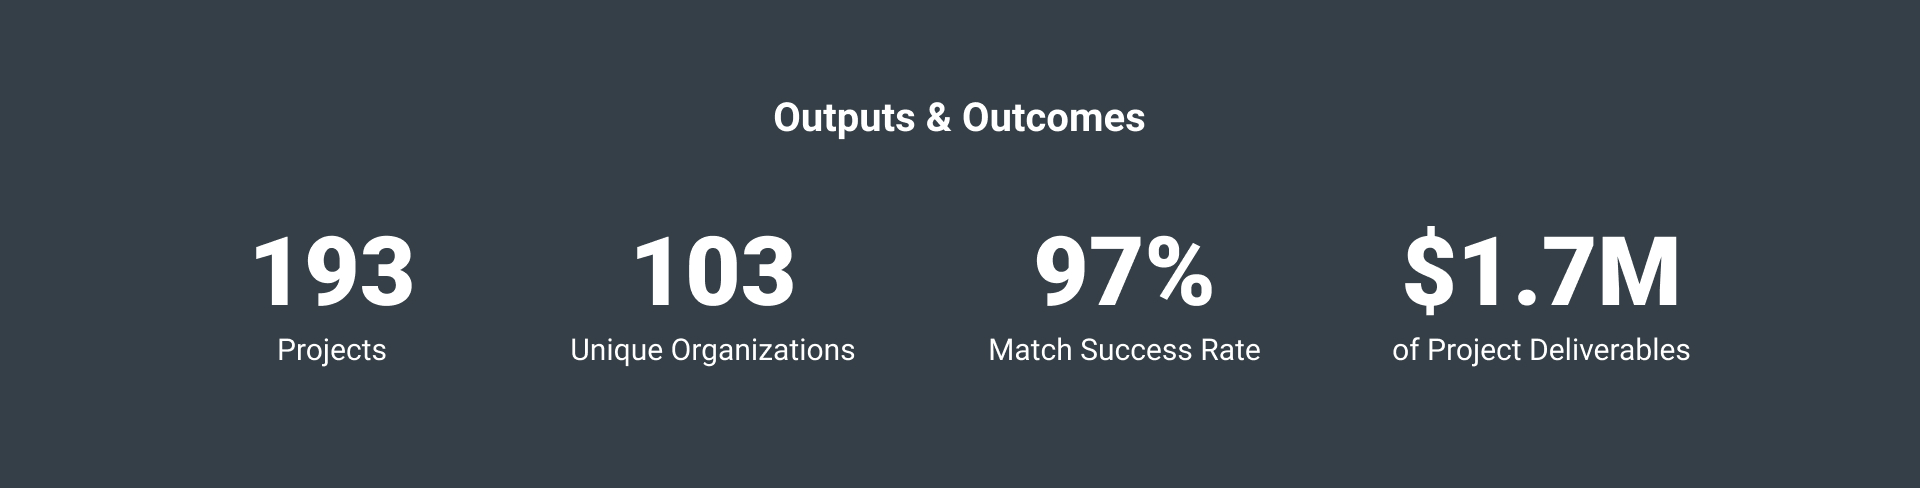 Outputs and Outcomes